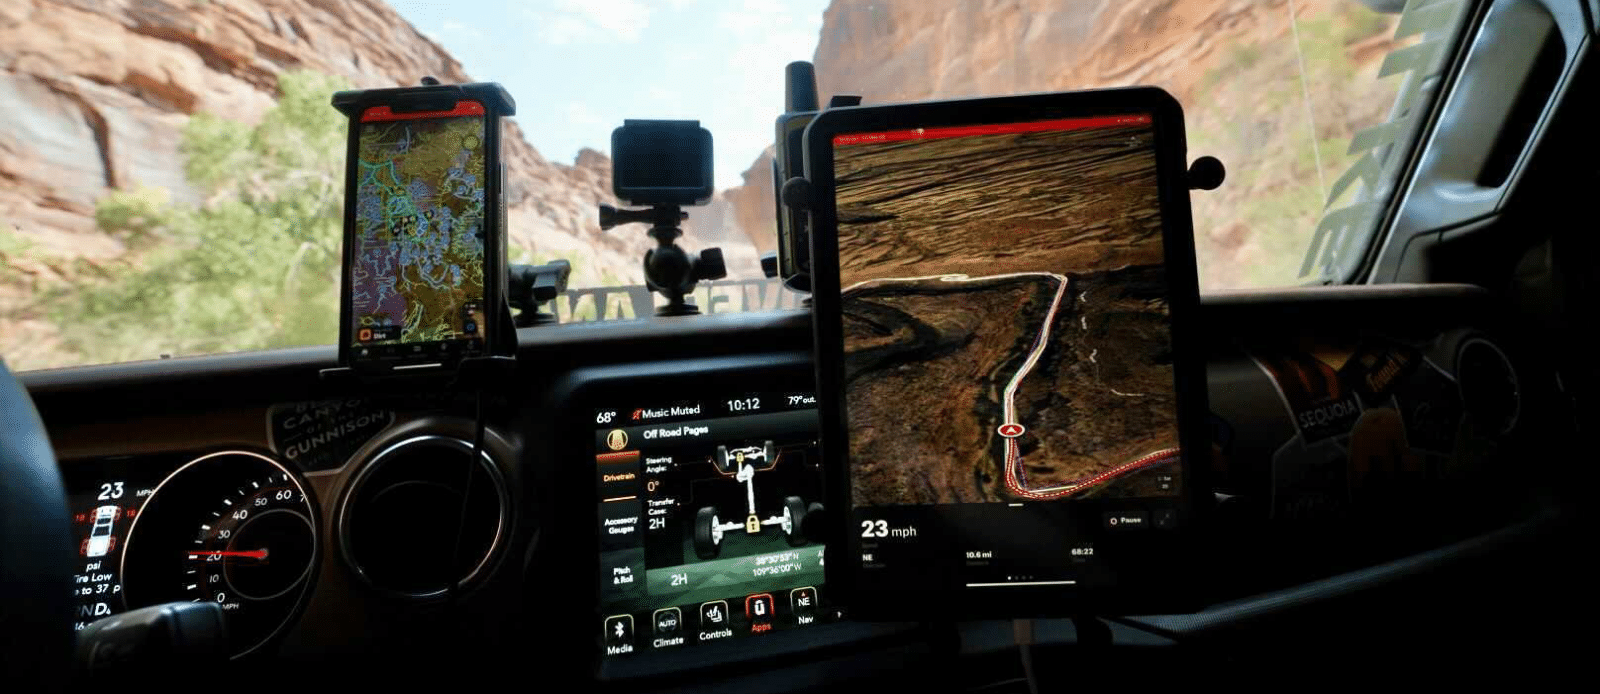 tablets for off roading